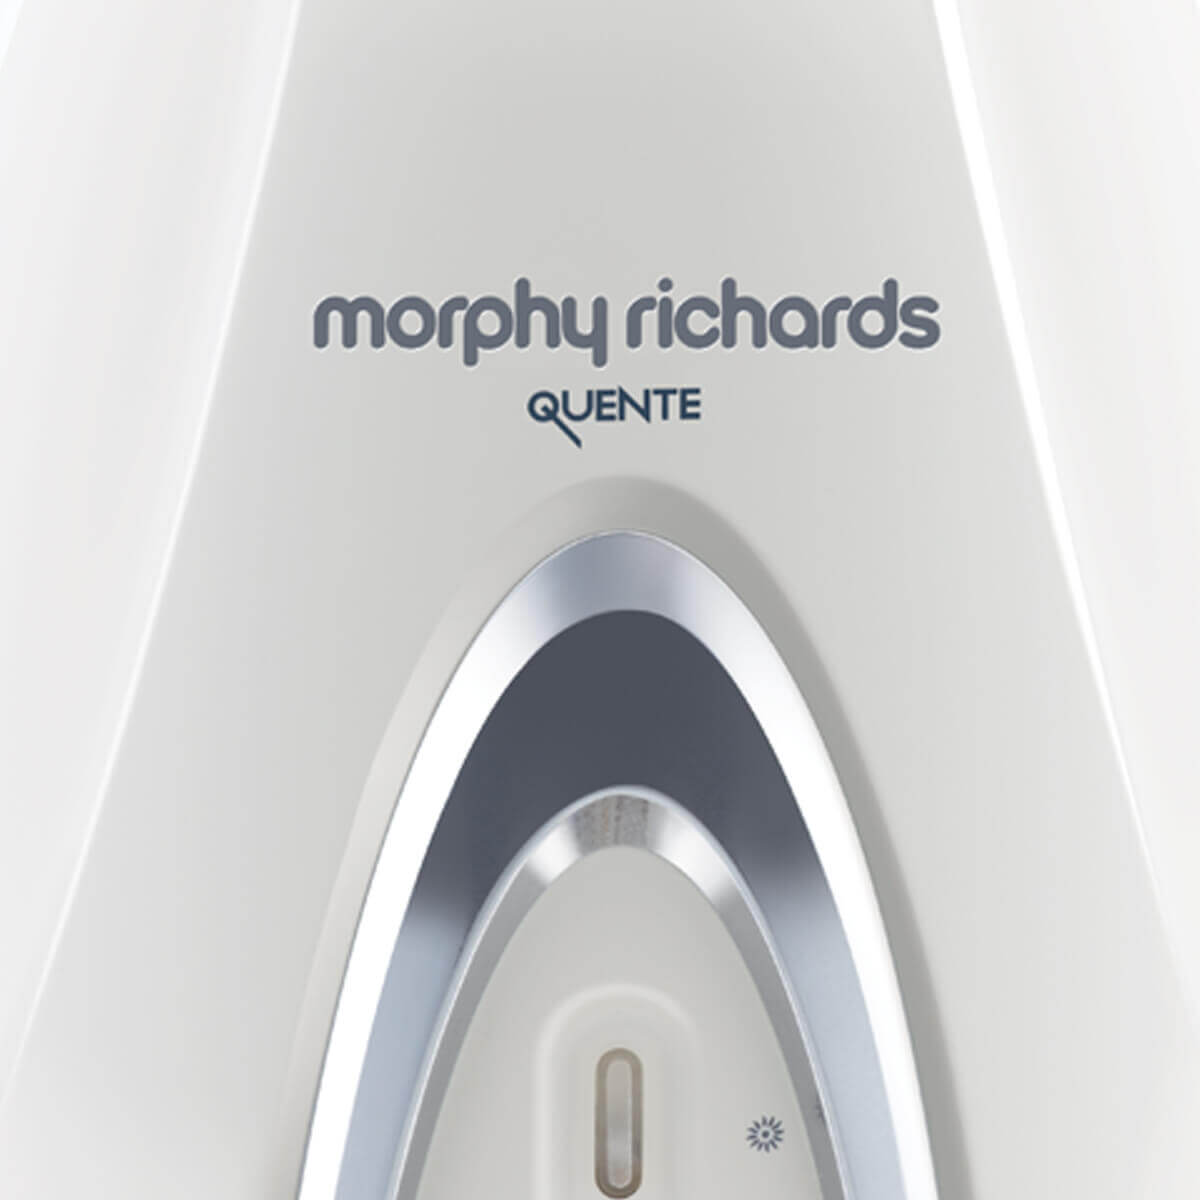 Morphy Richards Quente Water Heater 3 Litre-3 KW